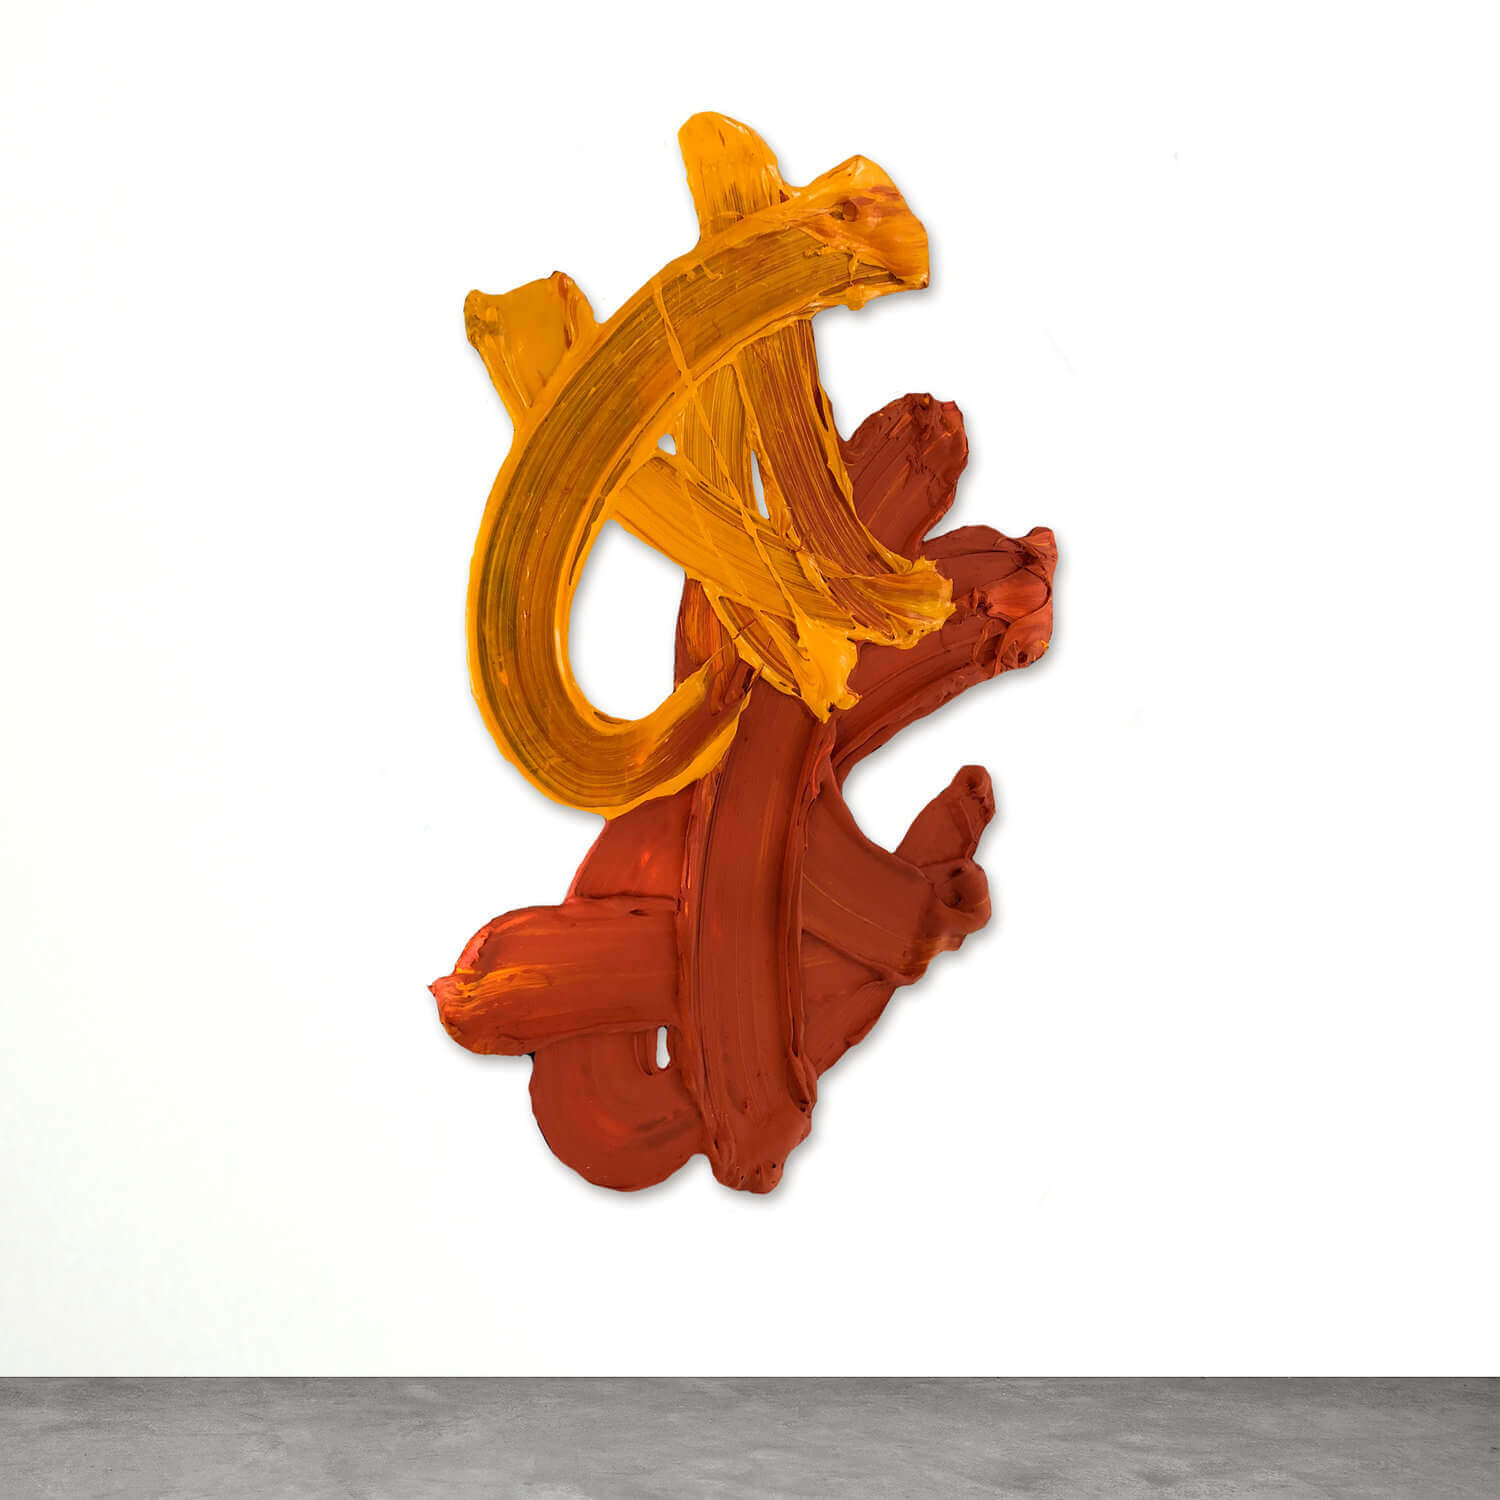 Donald Martiny, Giga, 2018, polymer and dispersed pigment on aluminum, 60 x 40 inches (courtesy of the artist)